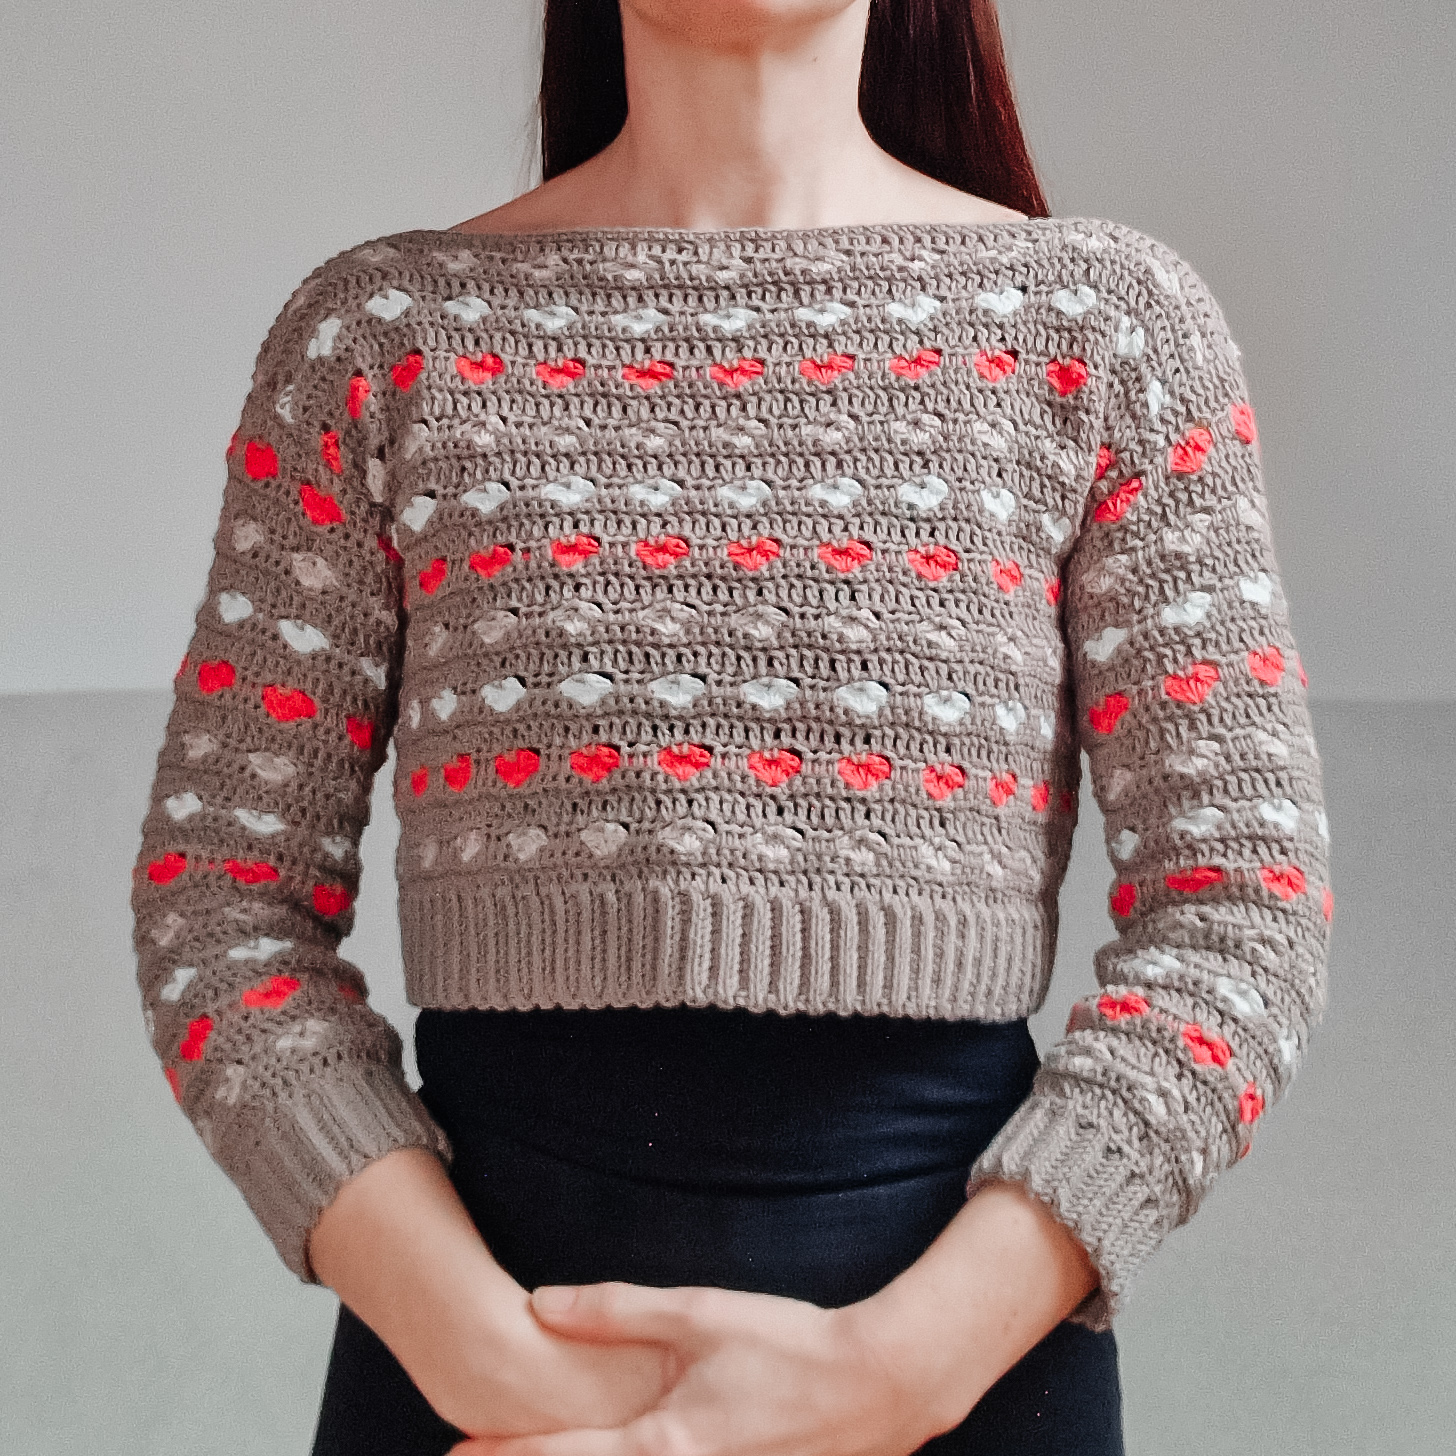 Get Cozy with the Sweetheart Sweater Pattern!